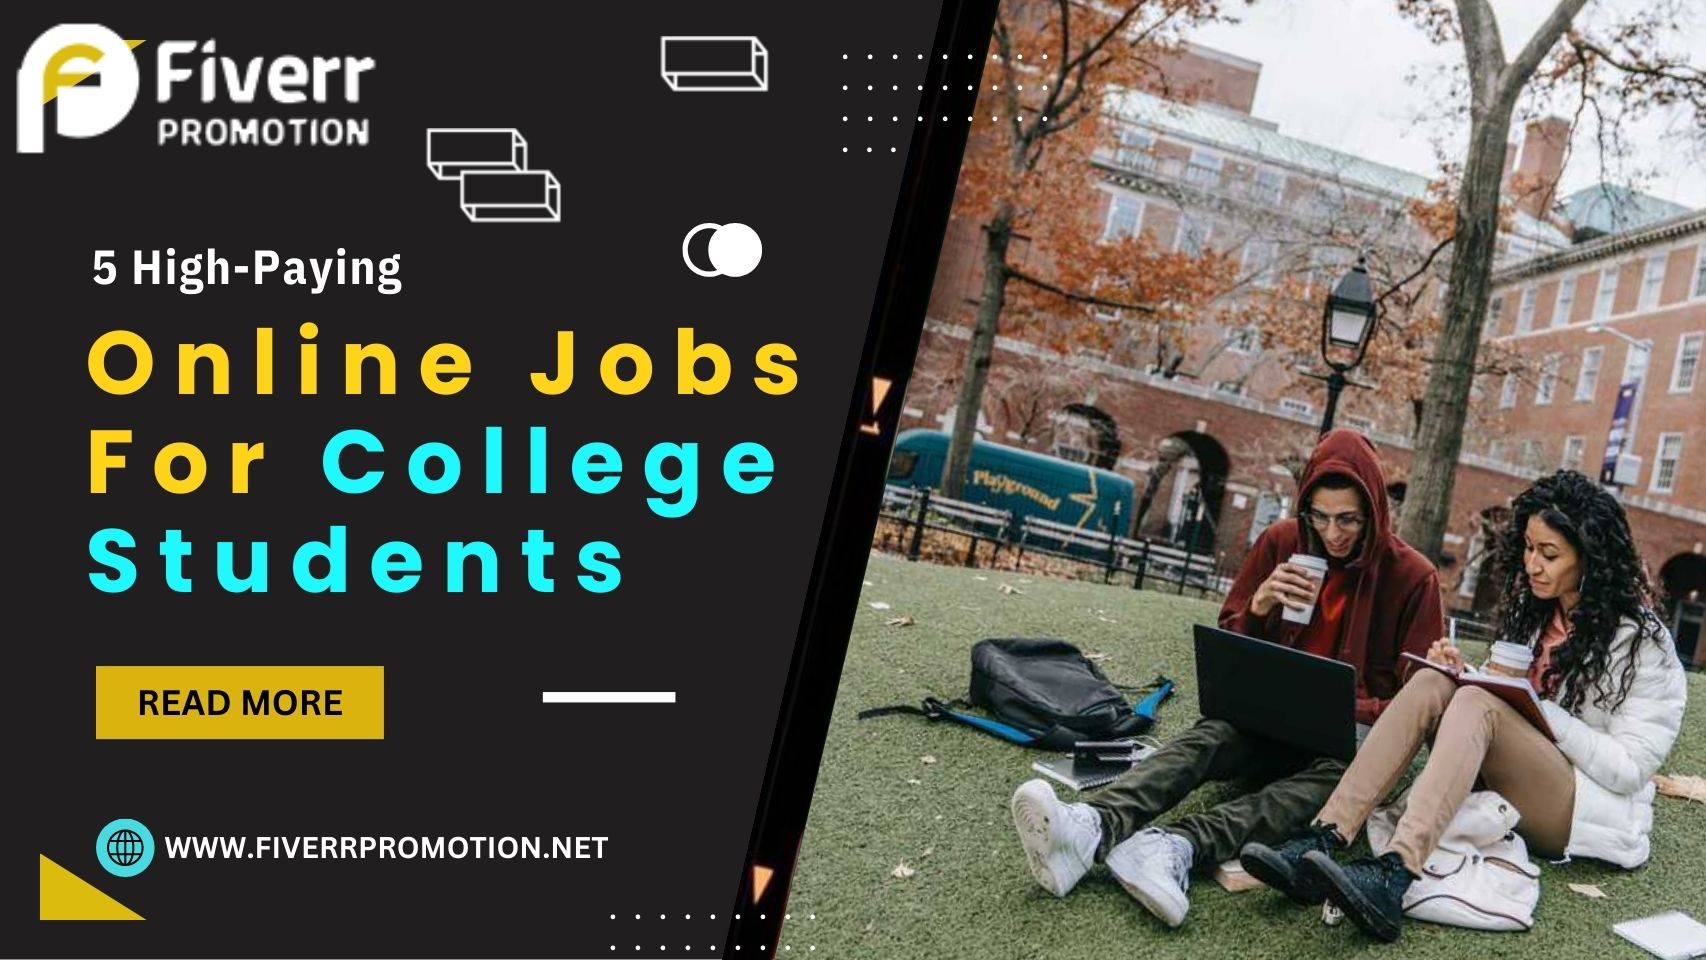 5 High-Paying Online Jobs for College Students